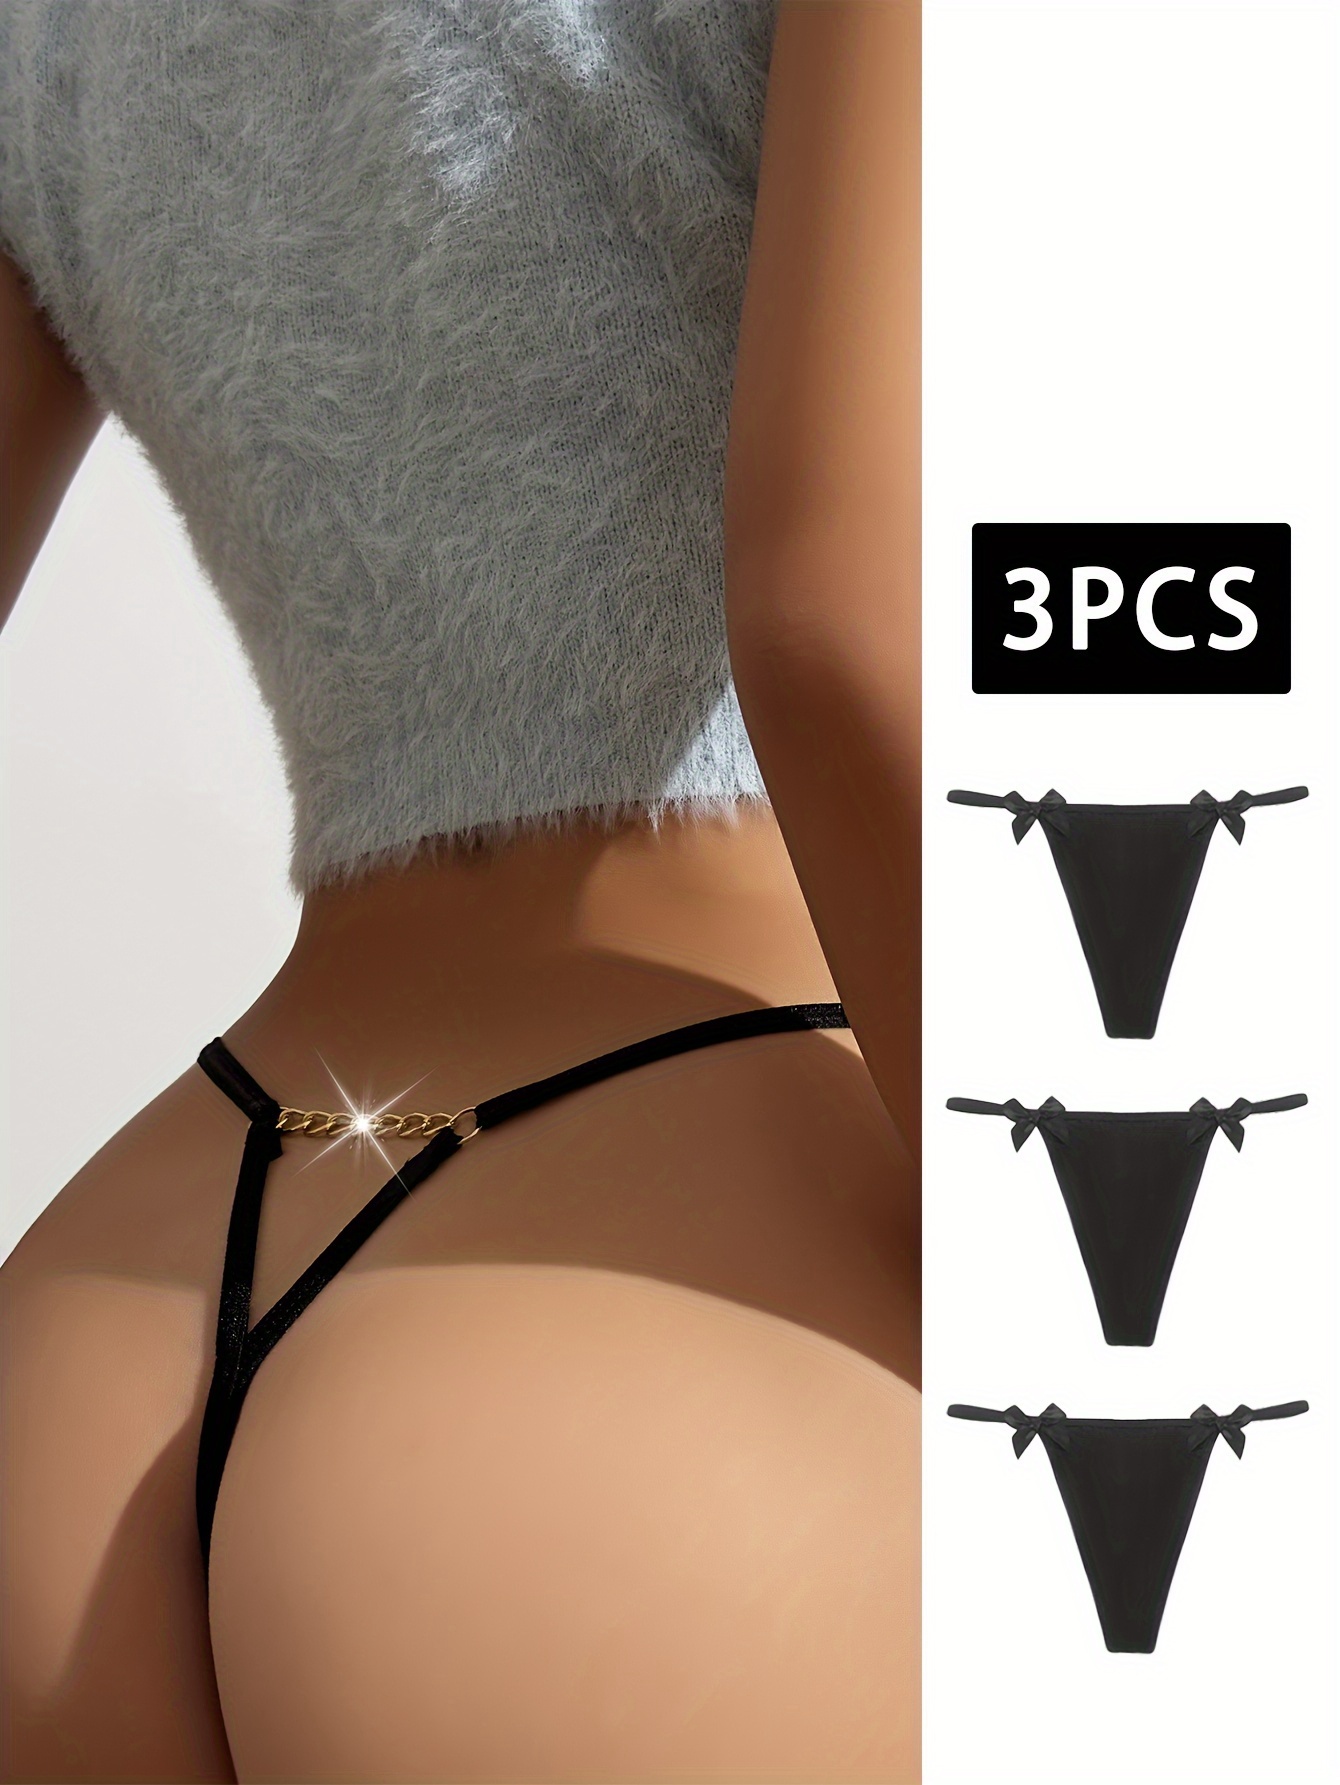 3pcs Chain Linked Thongs, Sexy Hollow Out Bow Decor Panties, Women's  Lingerie & Underwear